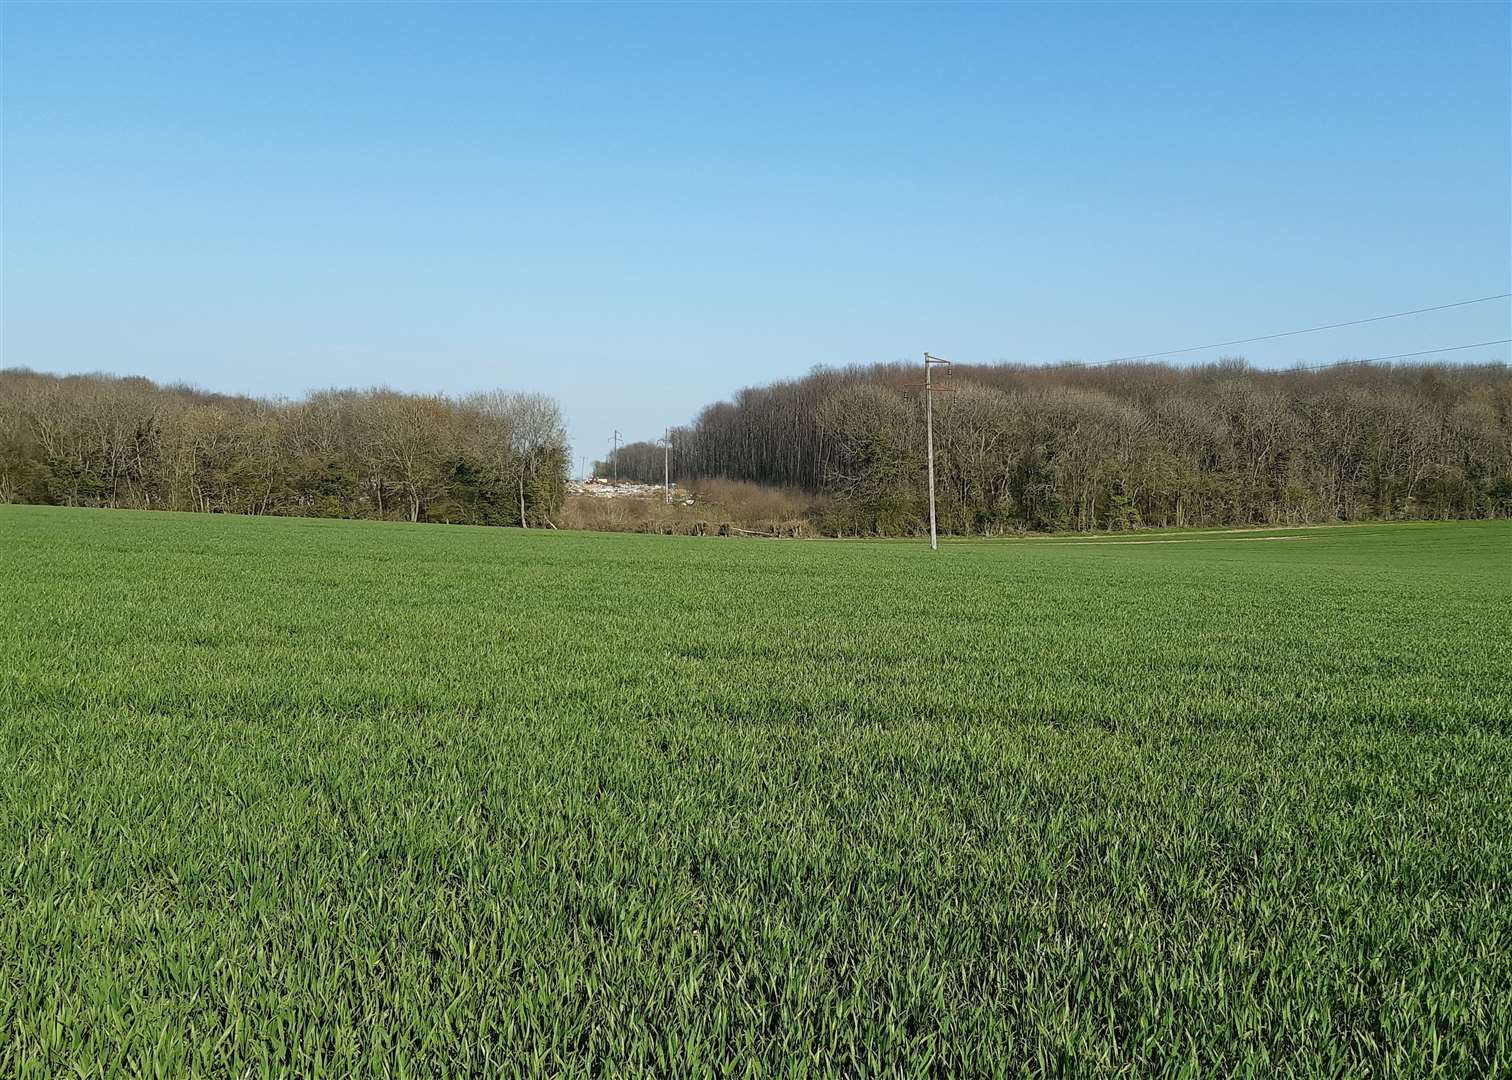 The Bell Lane site can be seen far from the distance